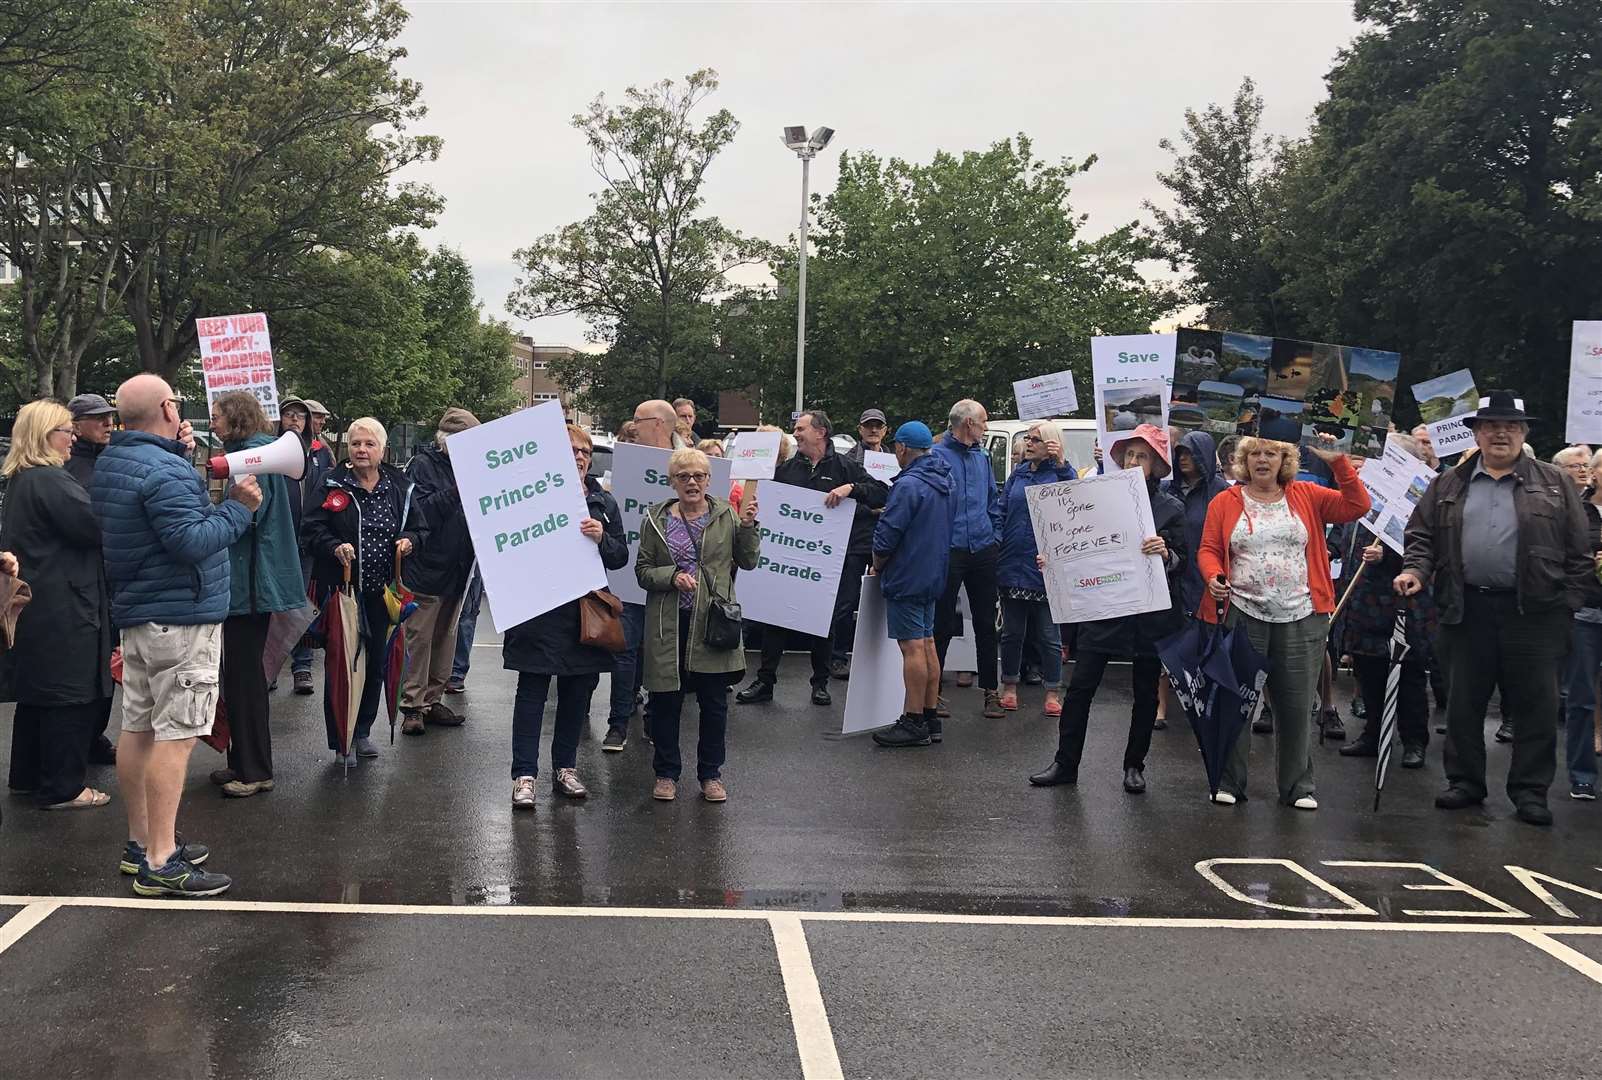 Protesters against the Princes Parade scheme gathered outside Folkestone and Hythe District Council